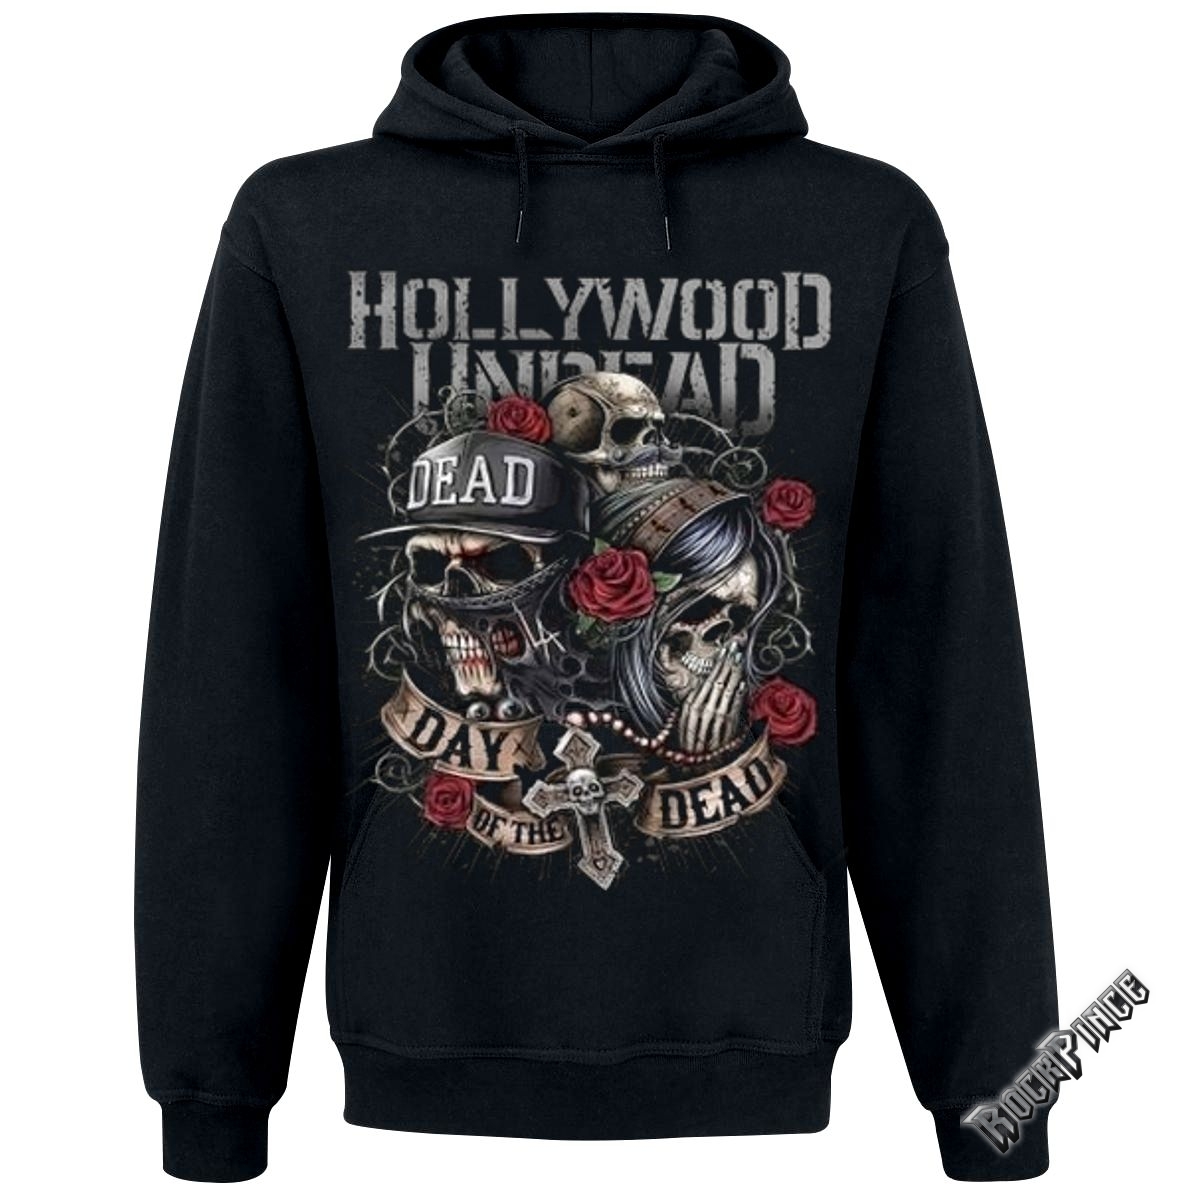 Hollywood Undead - Day of the Dead - kapucnis pulóver